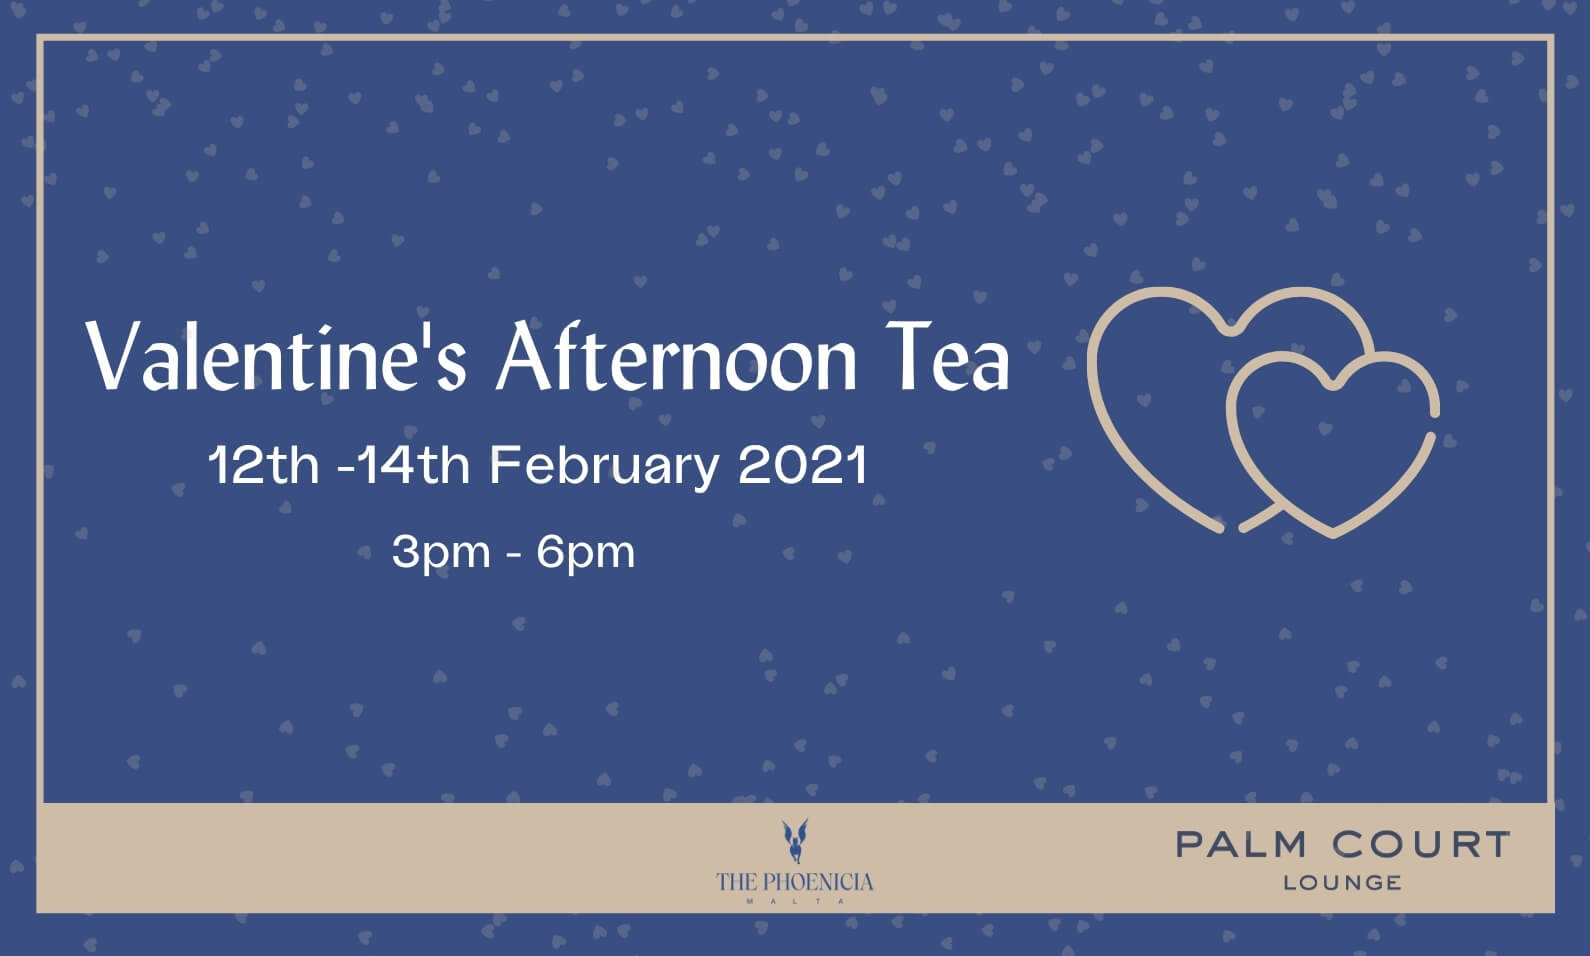 Valentine's Afternoon Tea at the Palm Court Lounge